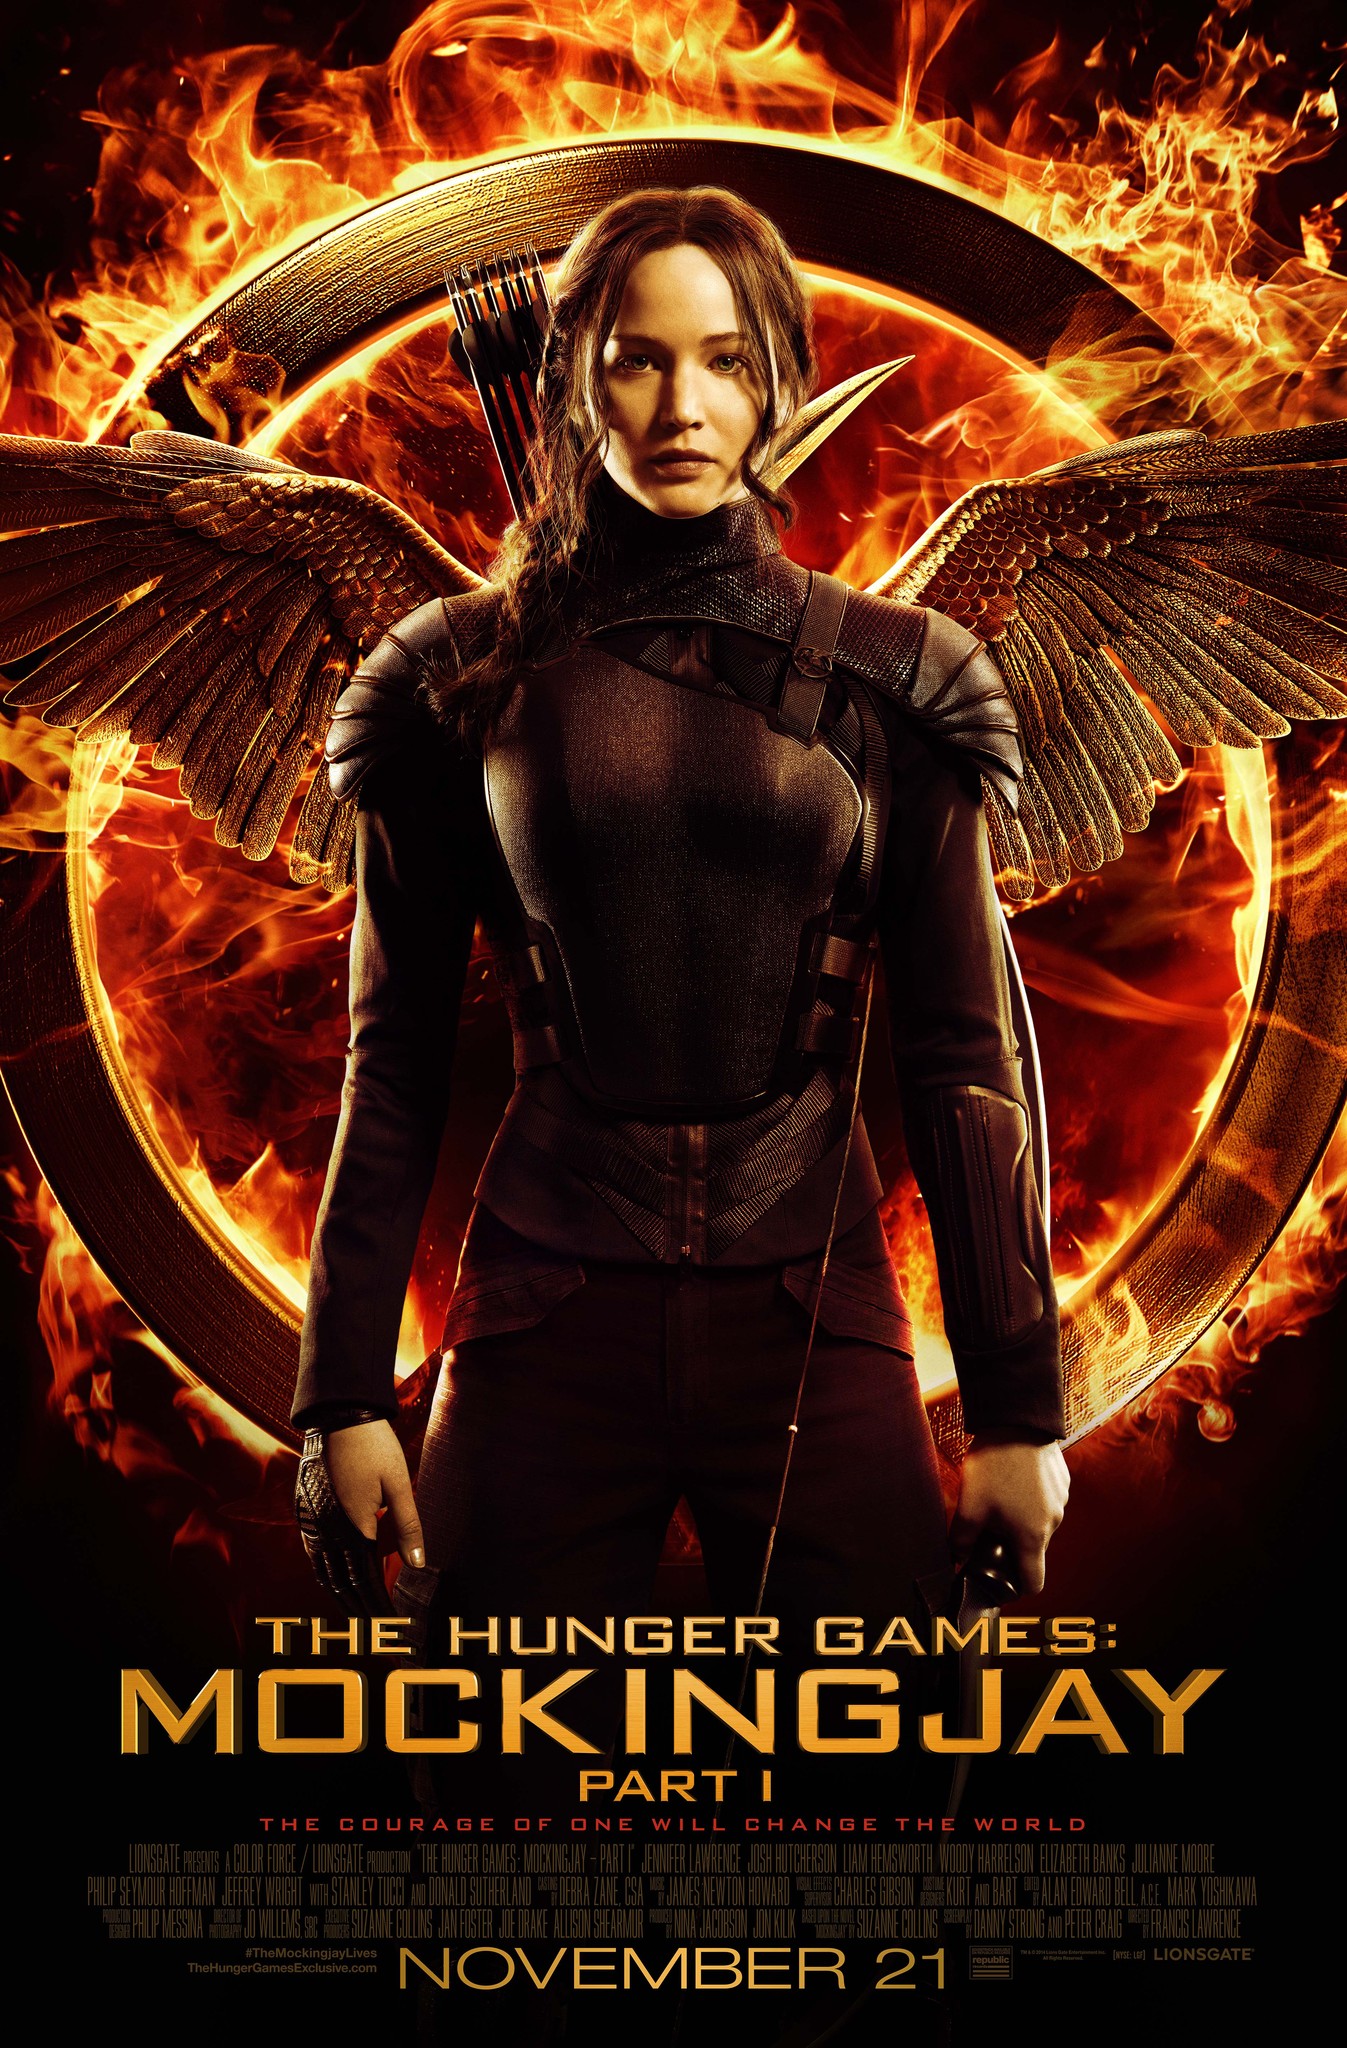 The hunger game movie series